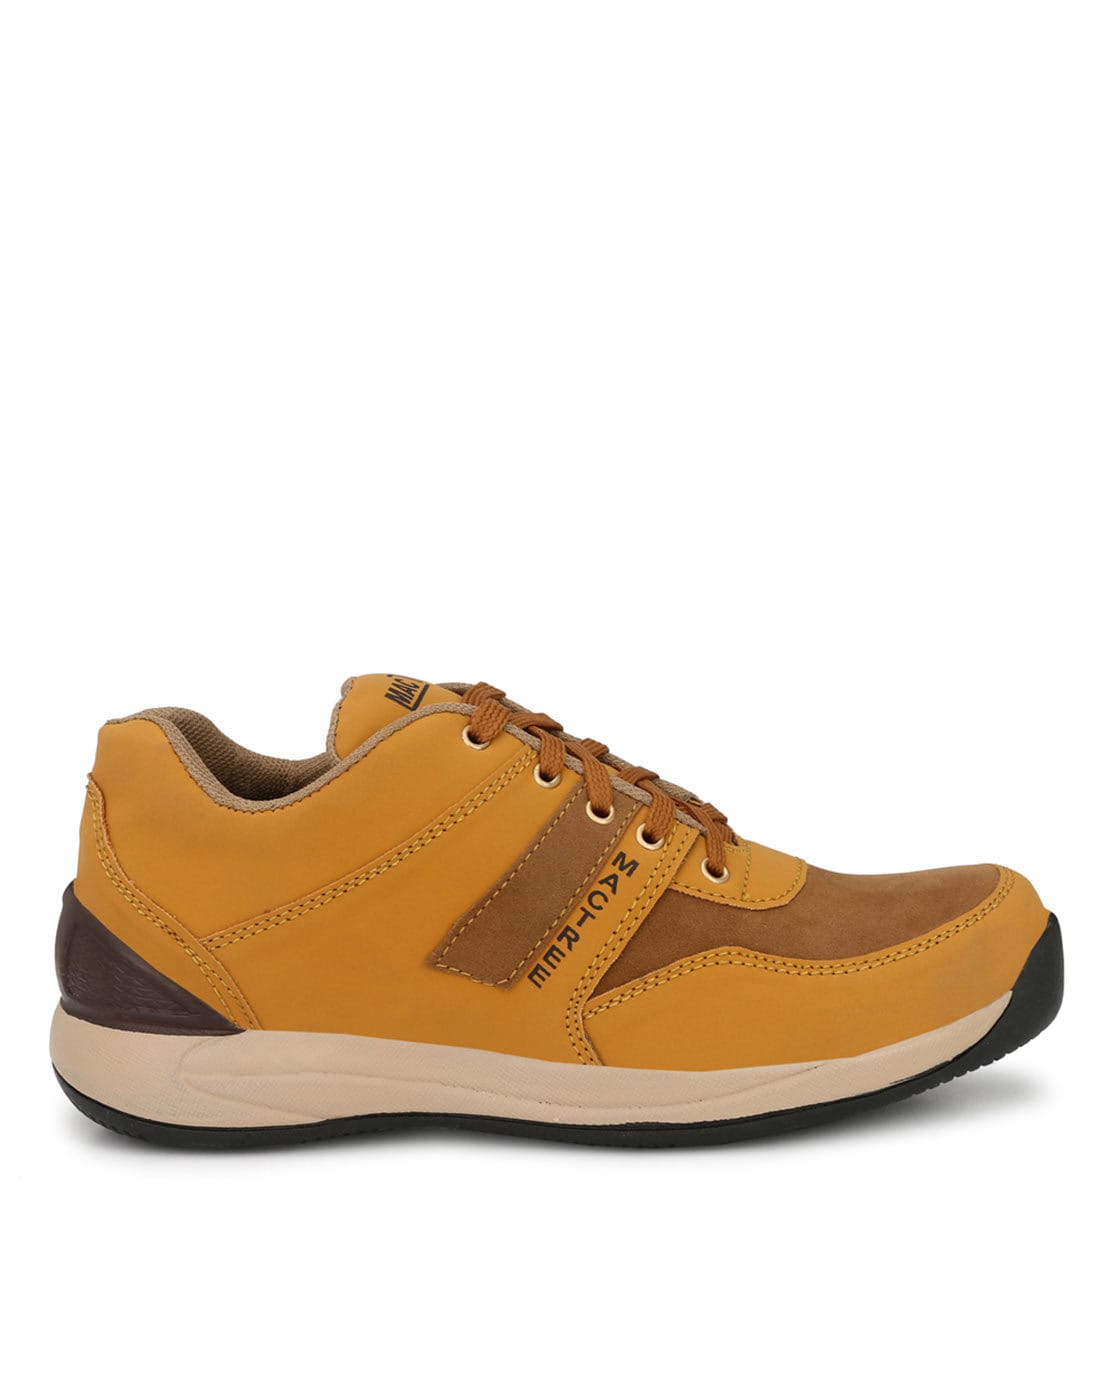 Buy Beige Casual Shoes for Men by 